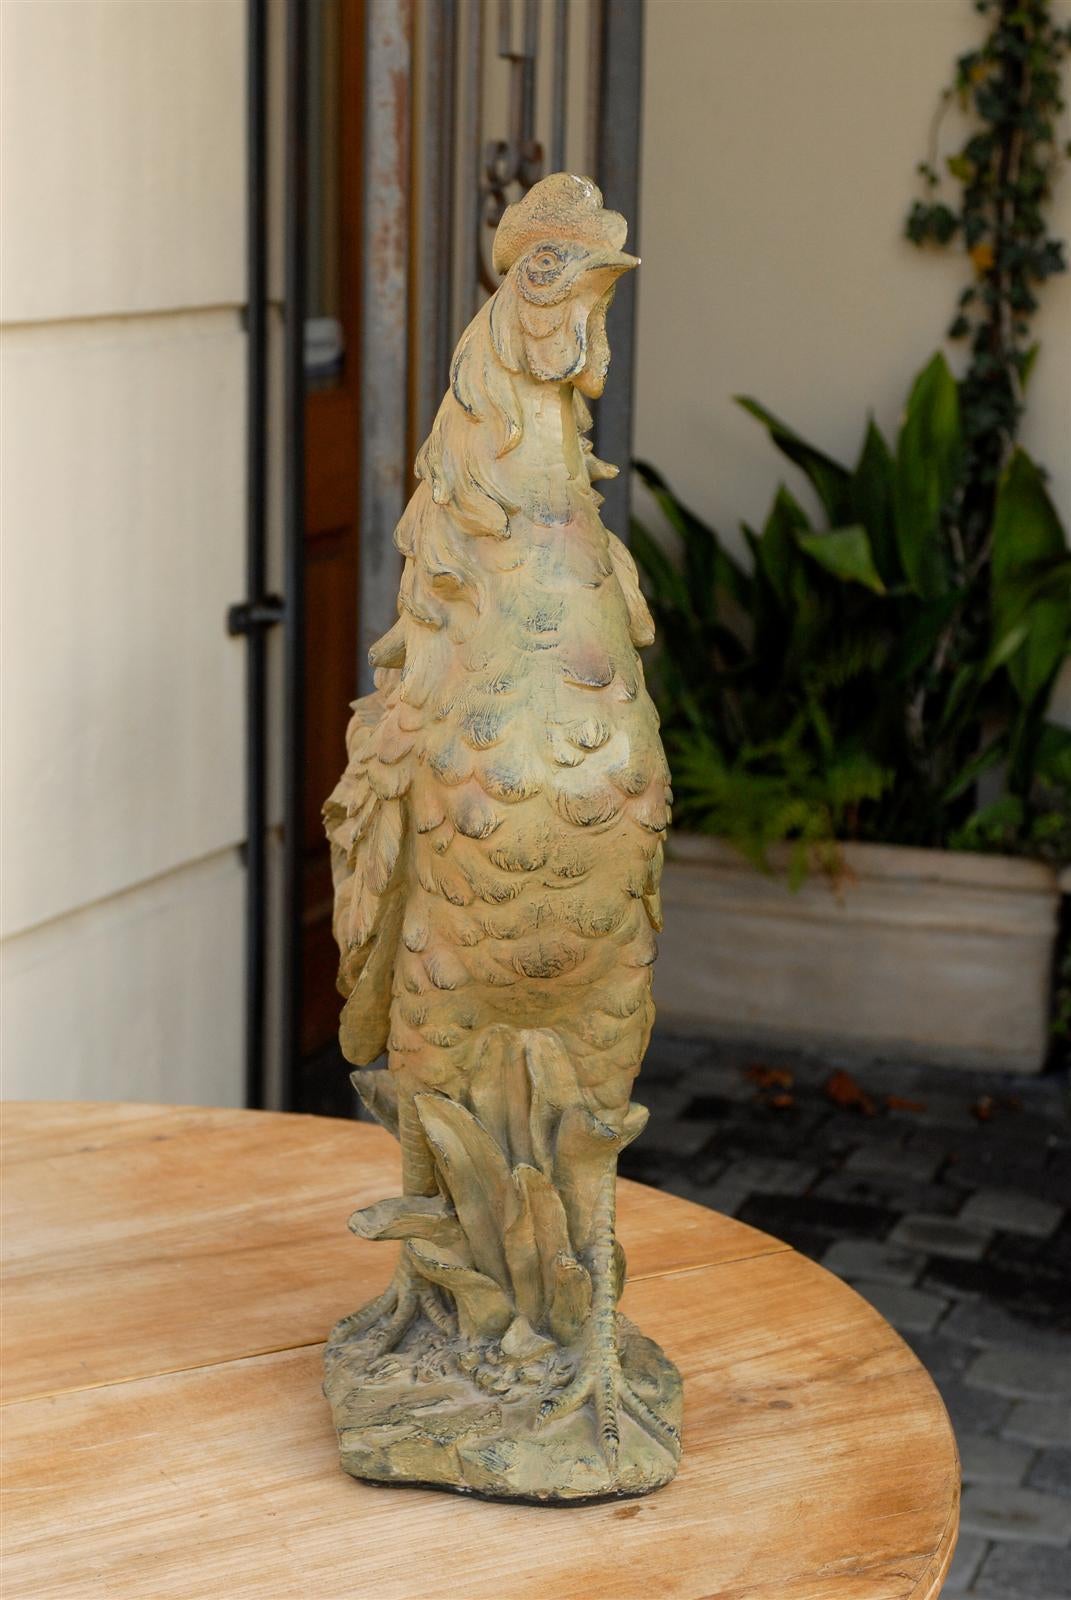 French Rooster Sculpture with Green & Black Accents from the Mid-20th Century For Sale 2